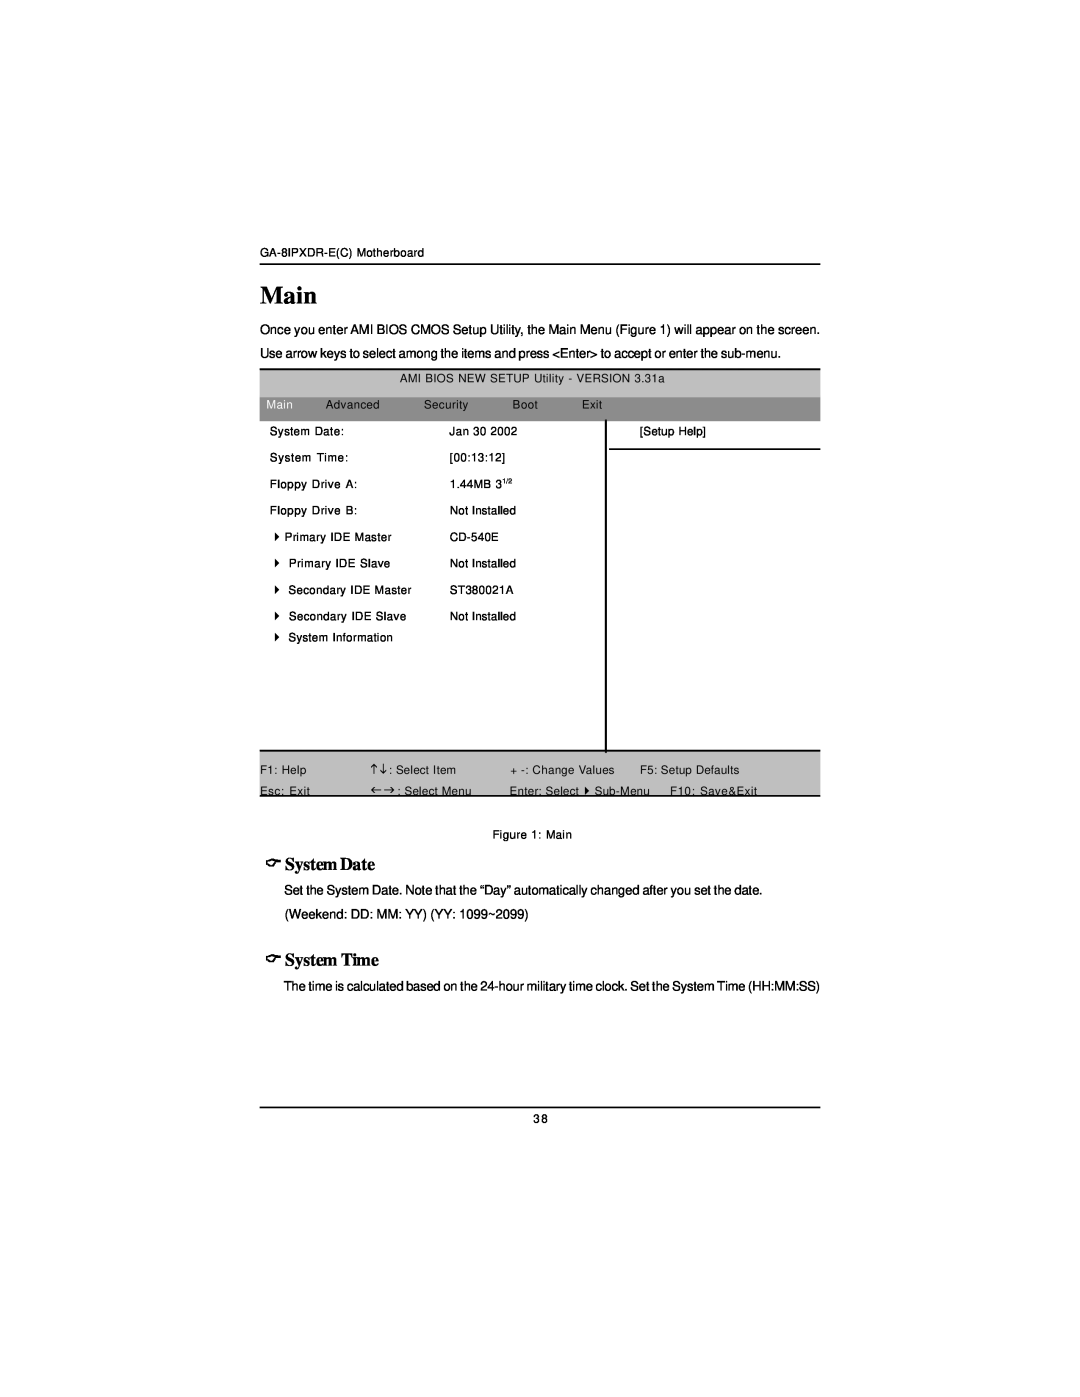 Intel GA-8IPXDR-E user manual Main, System Date, System Time 